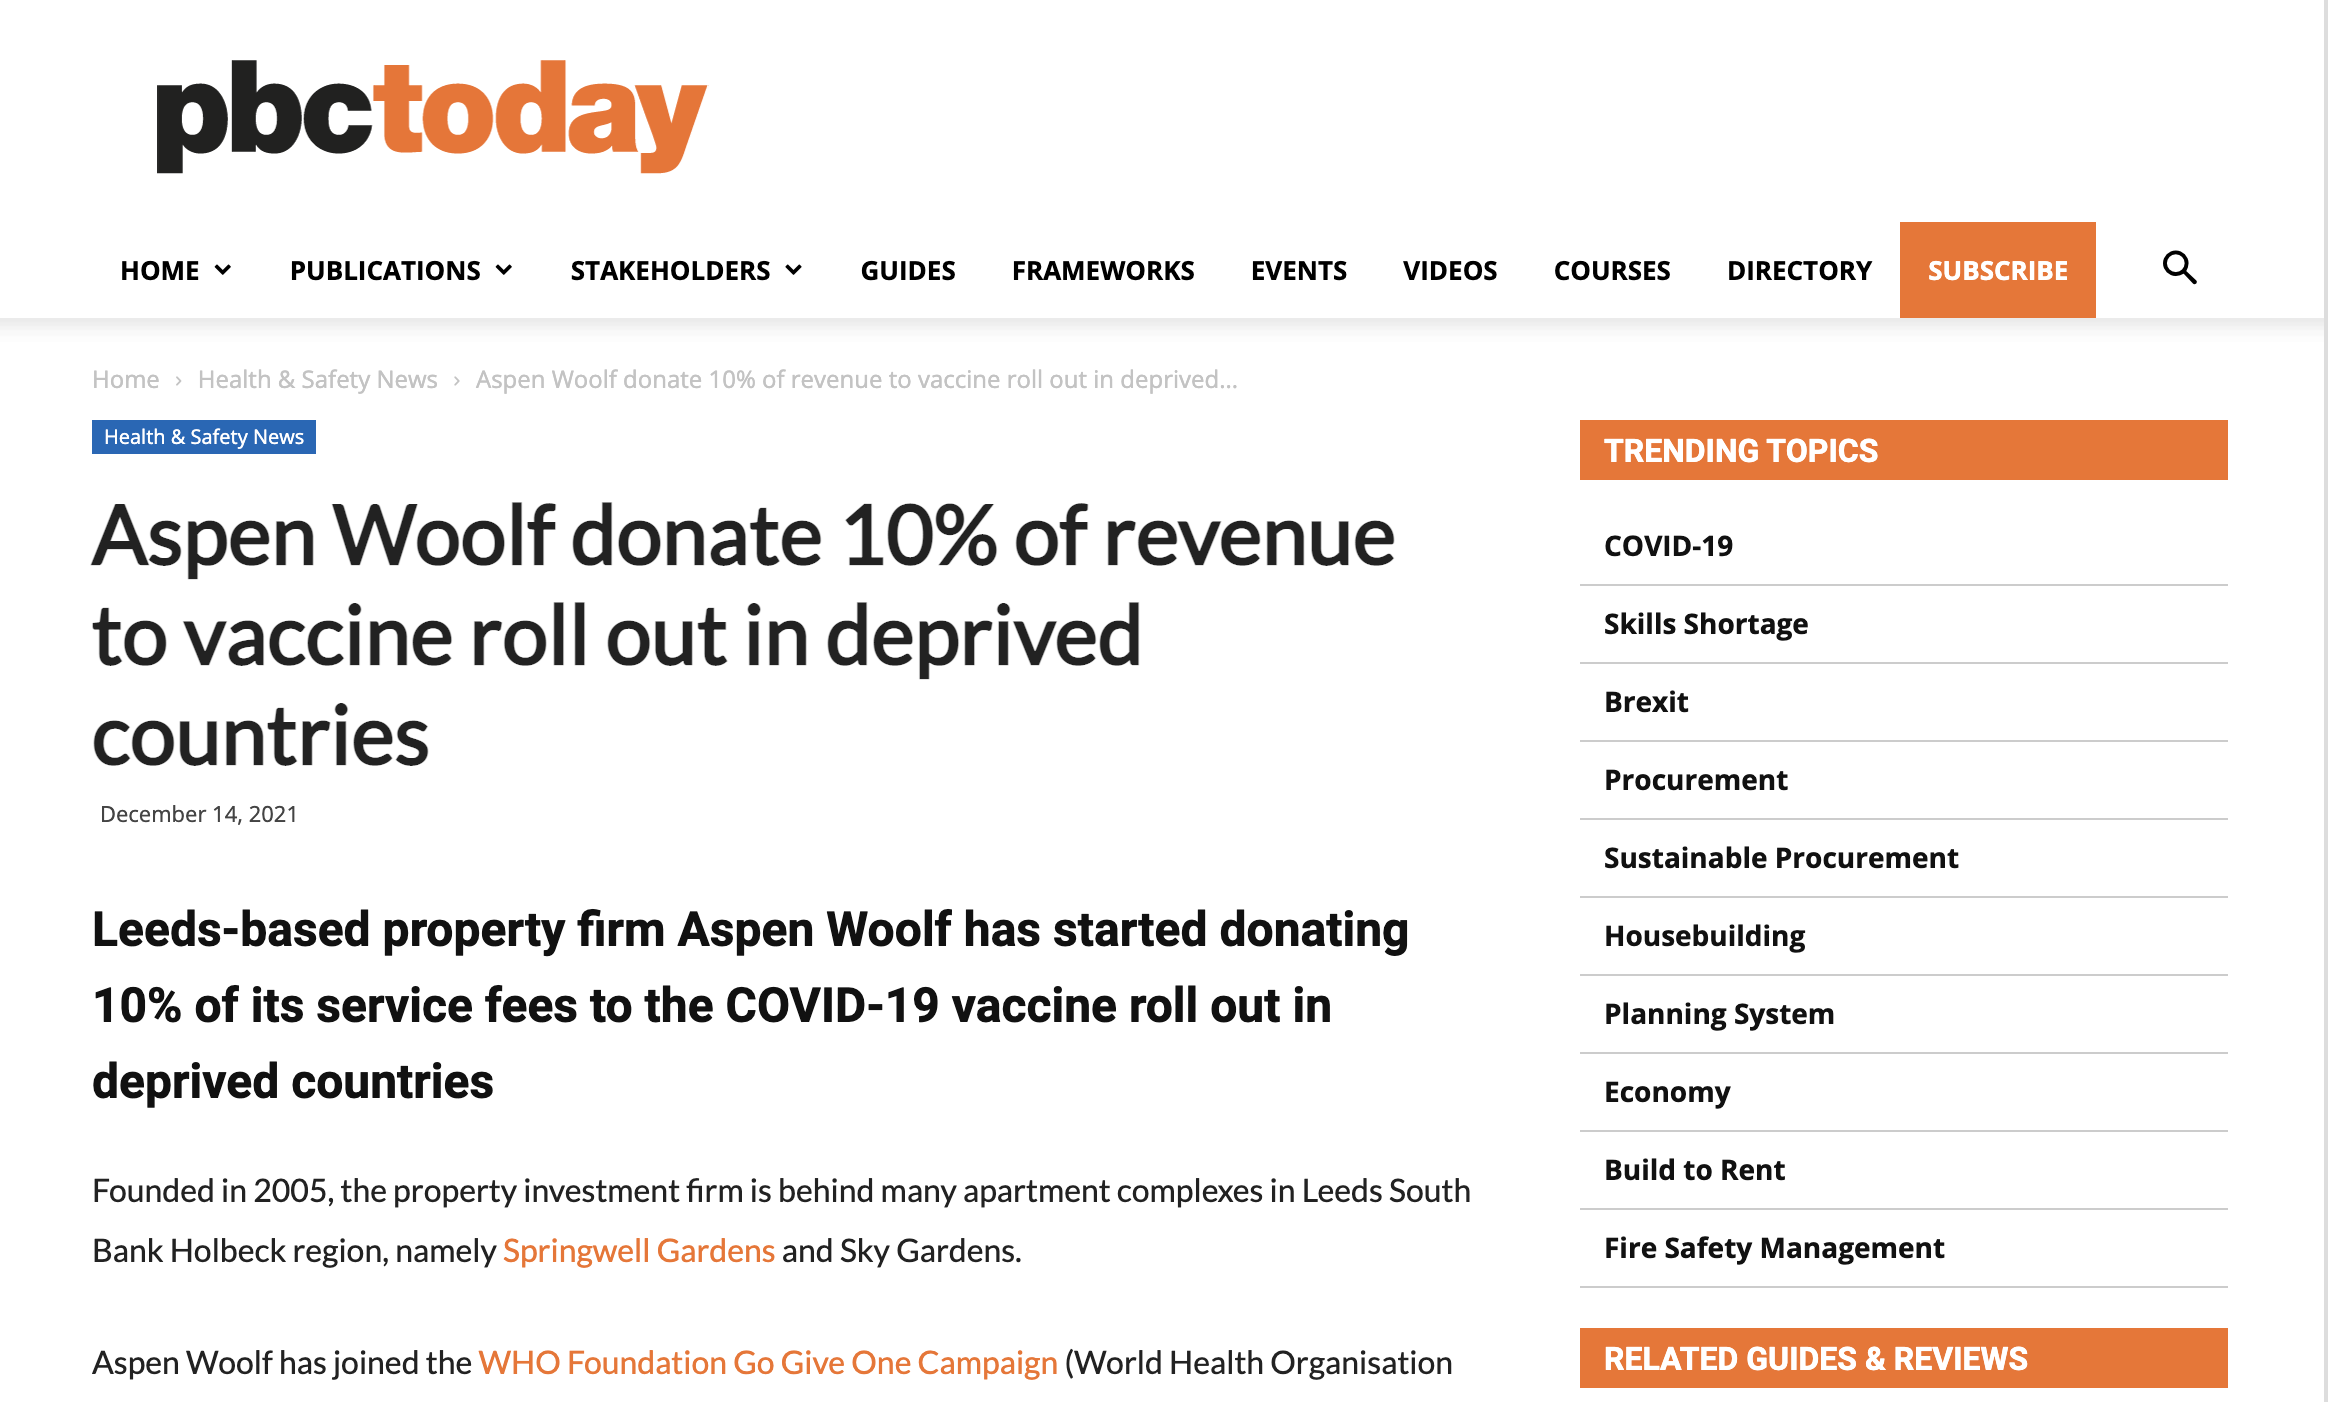 Aspen Woolf donate 10% of revenue to vaccine roll out in deprived countries